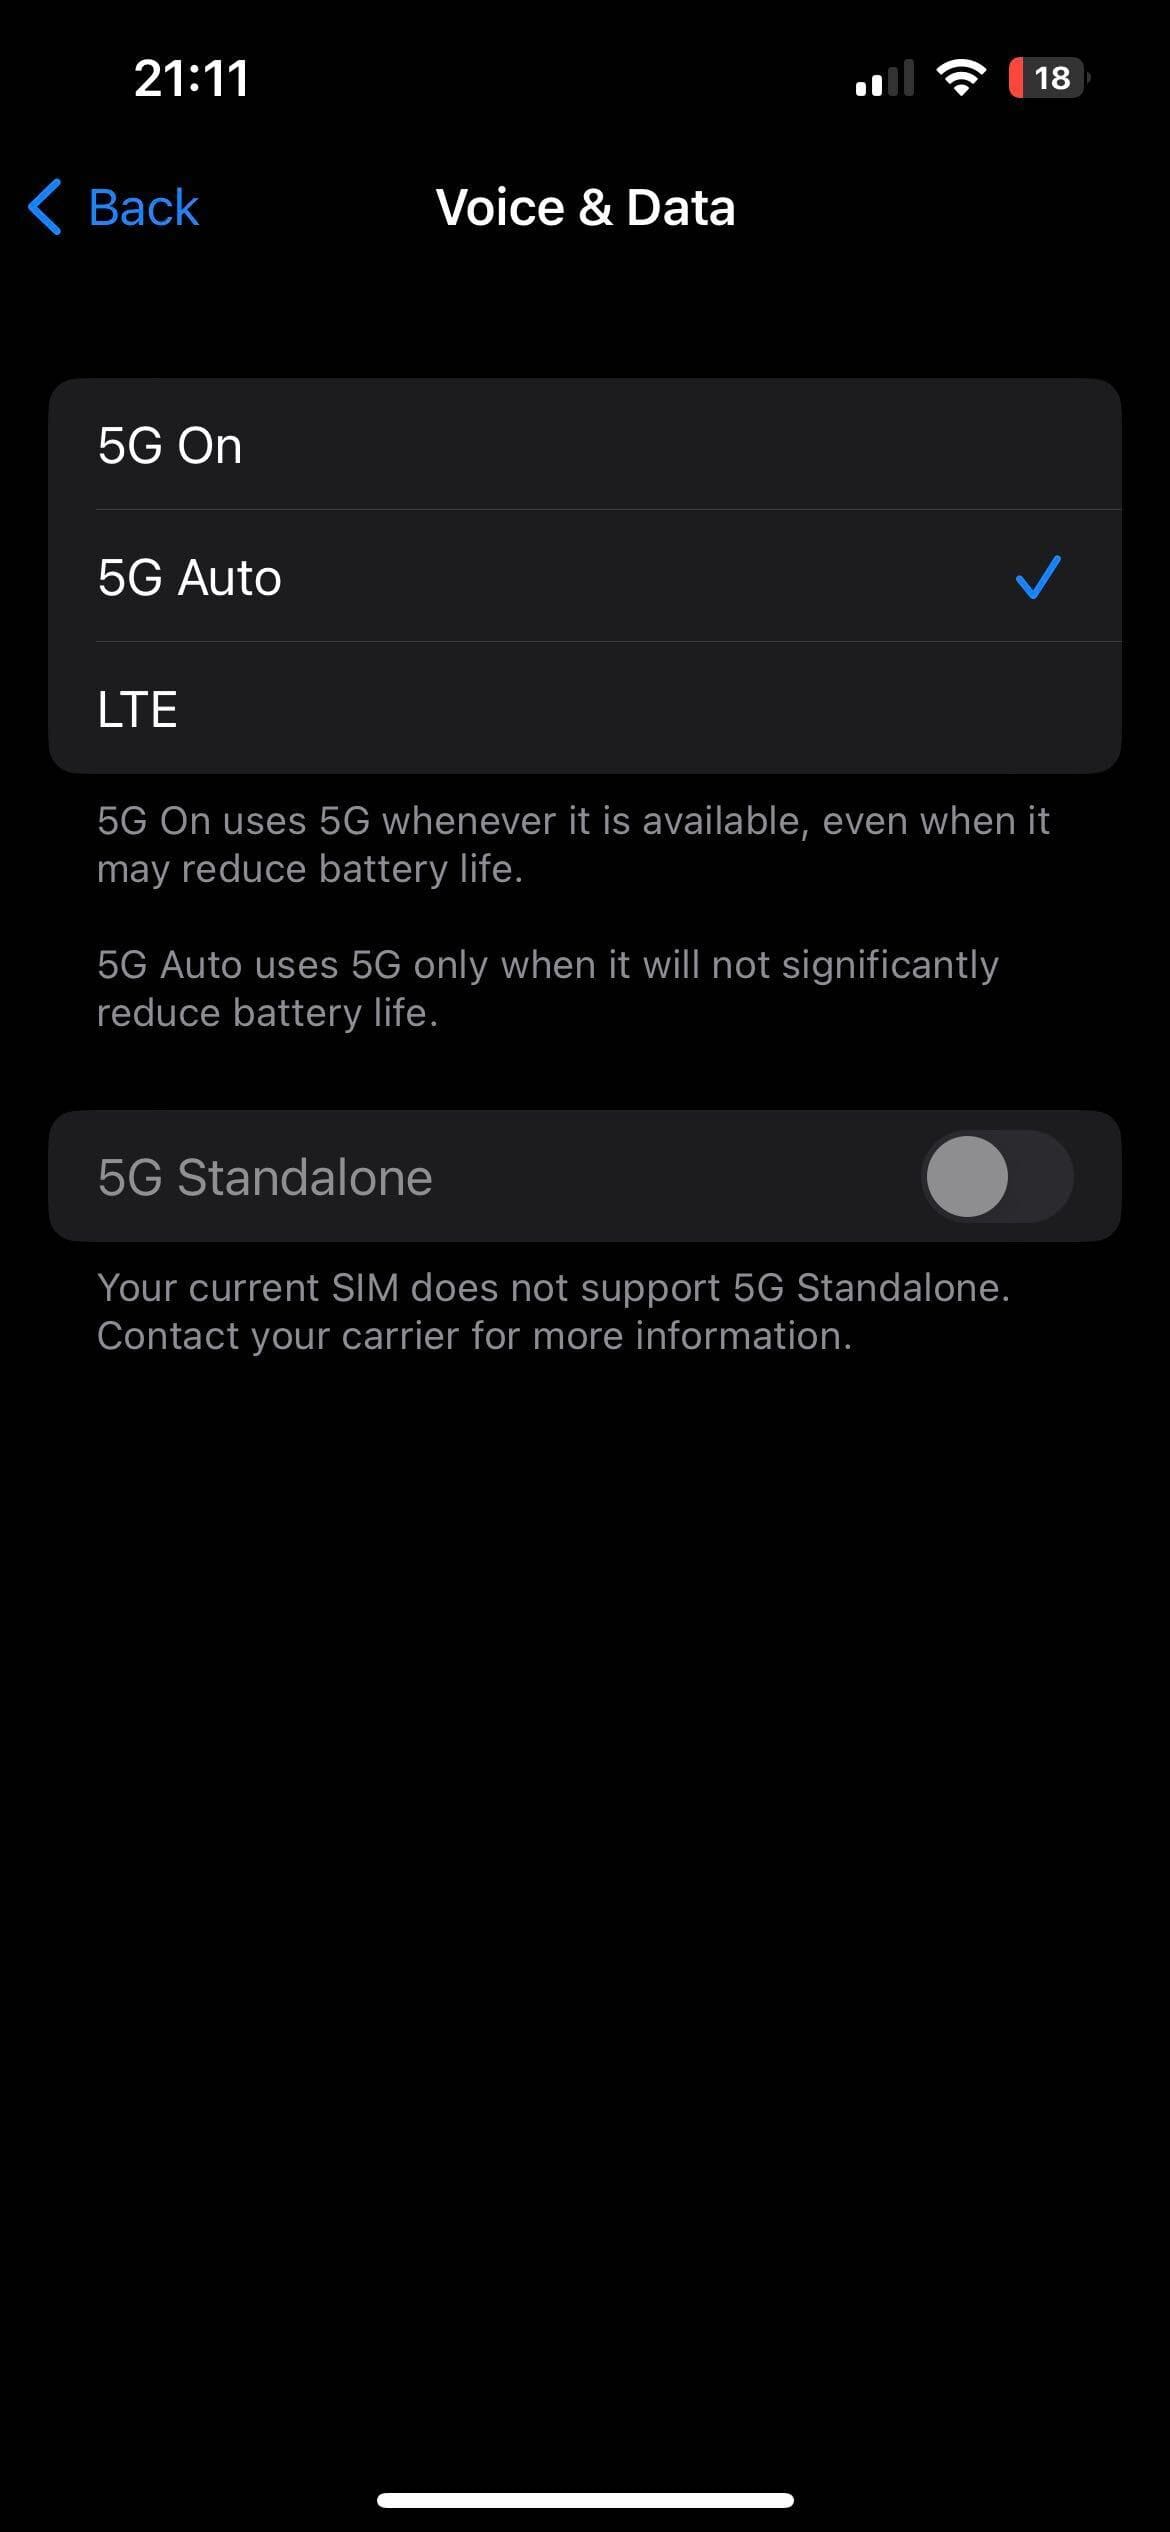 5G Auto in iPhone cellular settings to get fastest cellular speed